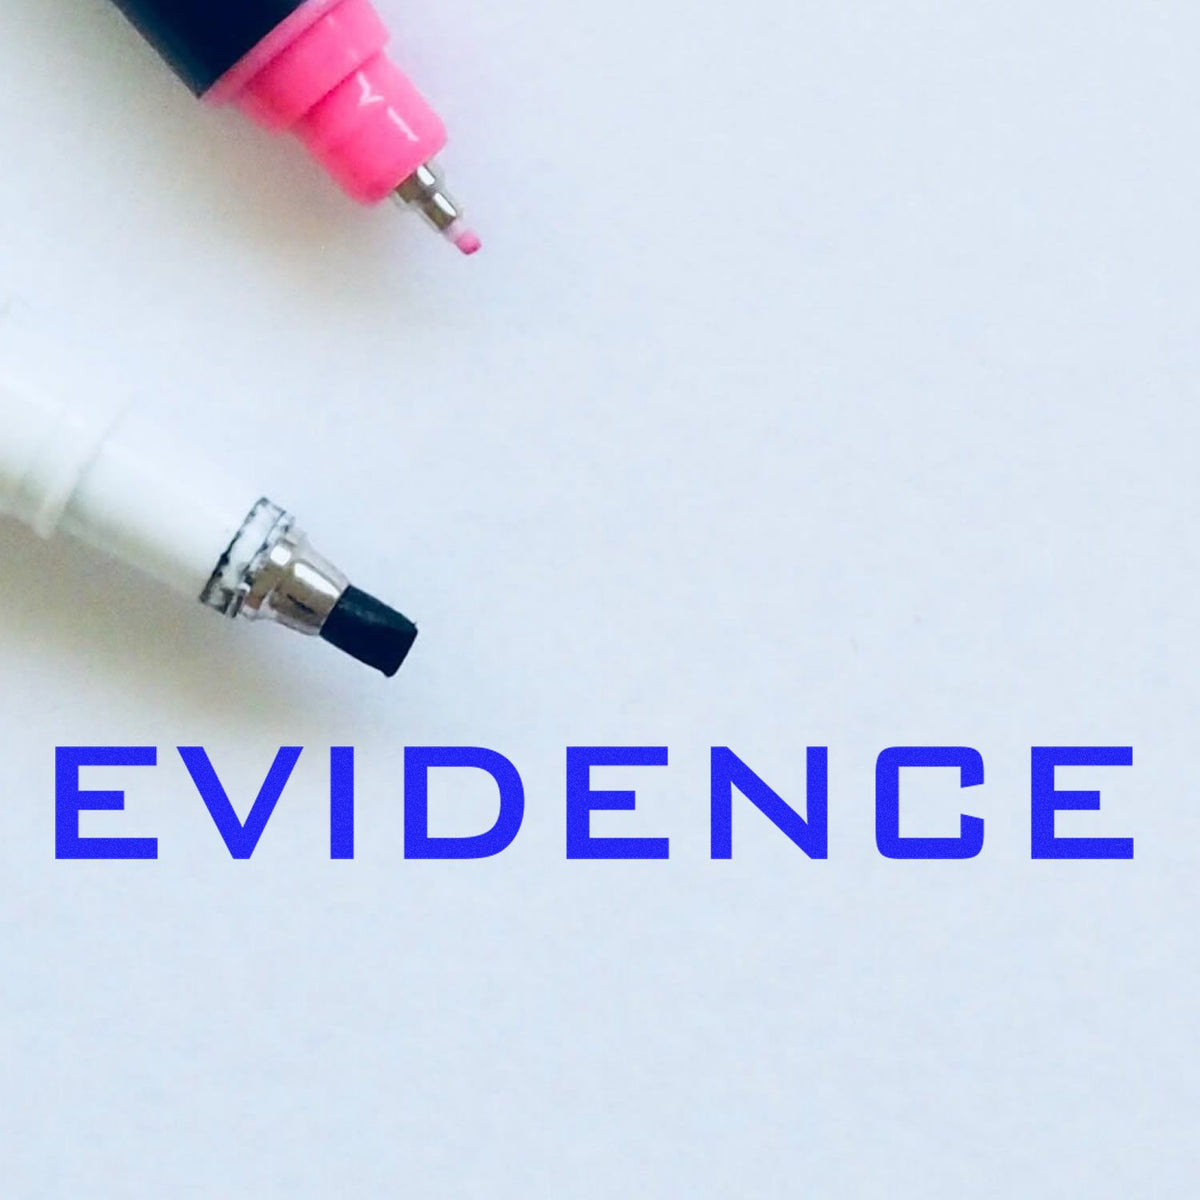 Self-Inking Evidence Stamp In Use Photo